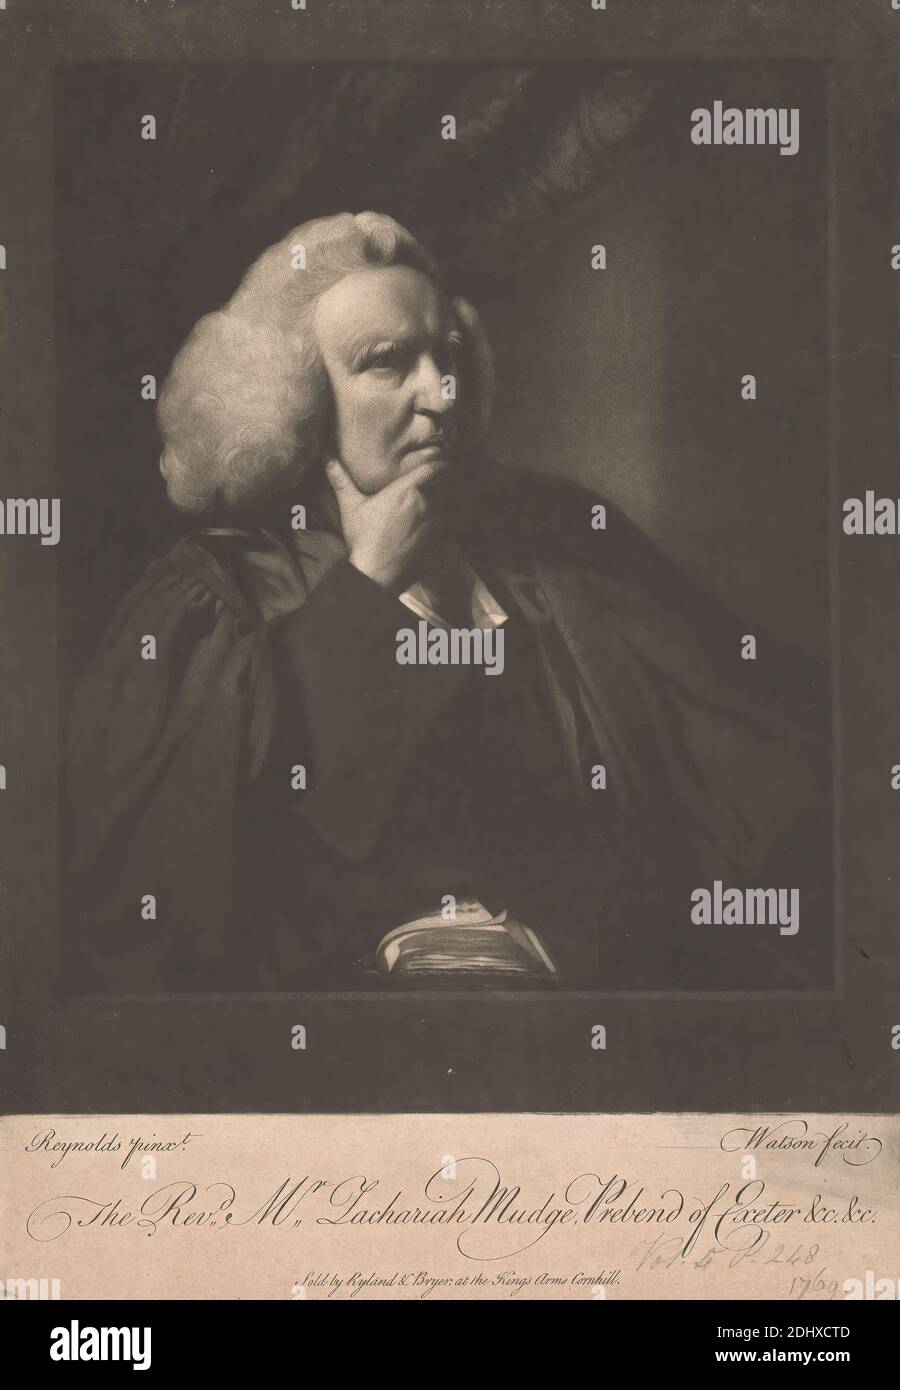 Reverend Zachariah Mudge, Prebend of Exeter, James Watson, 1740–1790, British, after Sir Joshua Reynolds RA, 1723–1792, British, 1769, Mezzotint on medium, slightly textured, beige, laid paper, Sheet: 13 × 9 inches (33 × 22.9 cm) and Image: 11 × 8 15/16 inches (27.9 × 22.7 cm), book, contemplation, eyebrows, portrait, religious and mythological subject, robes, shadows, wig Stock Photo